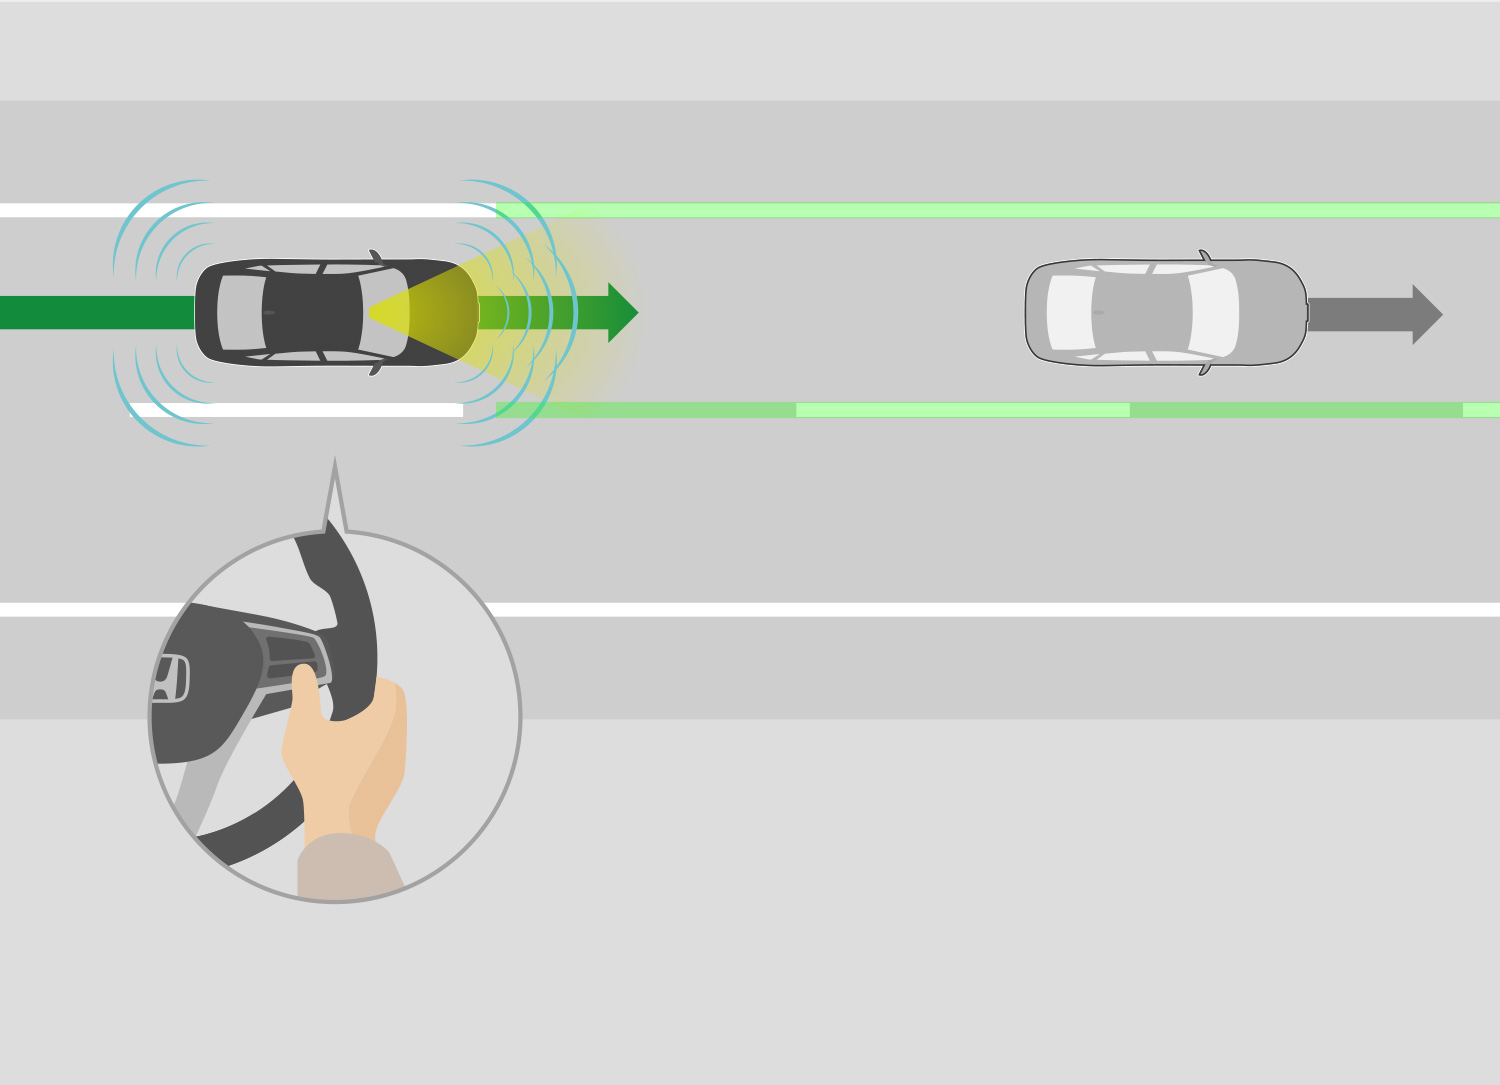 While driving on using Advanced In-Lane Driving, the driver presses the Advanced Lane Change Switch.